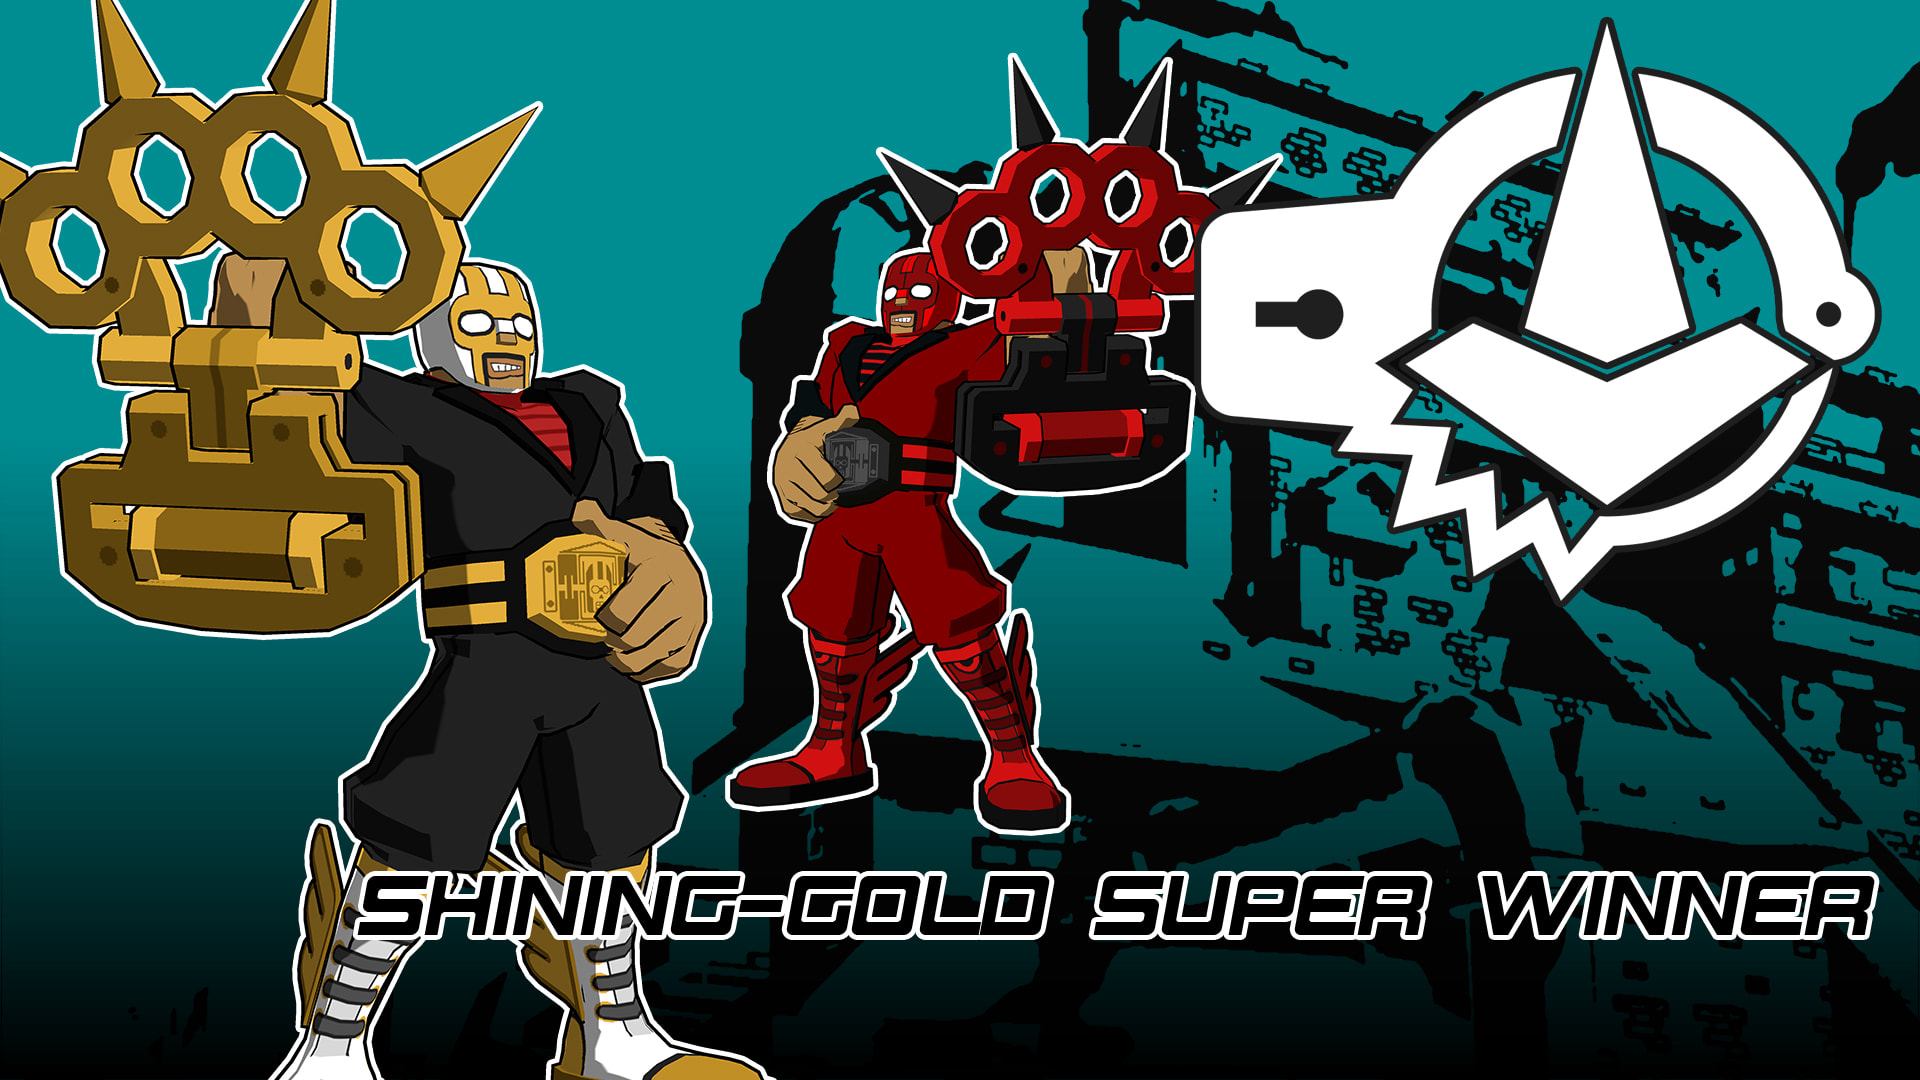 Shining-Gold Super Winner outfit for Nitro 1